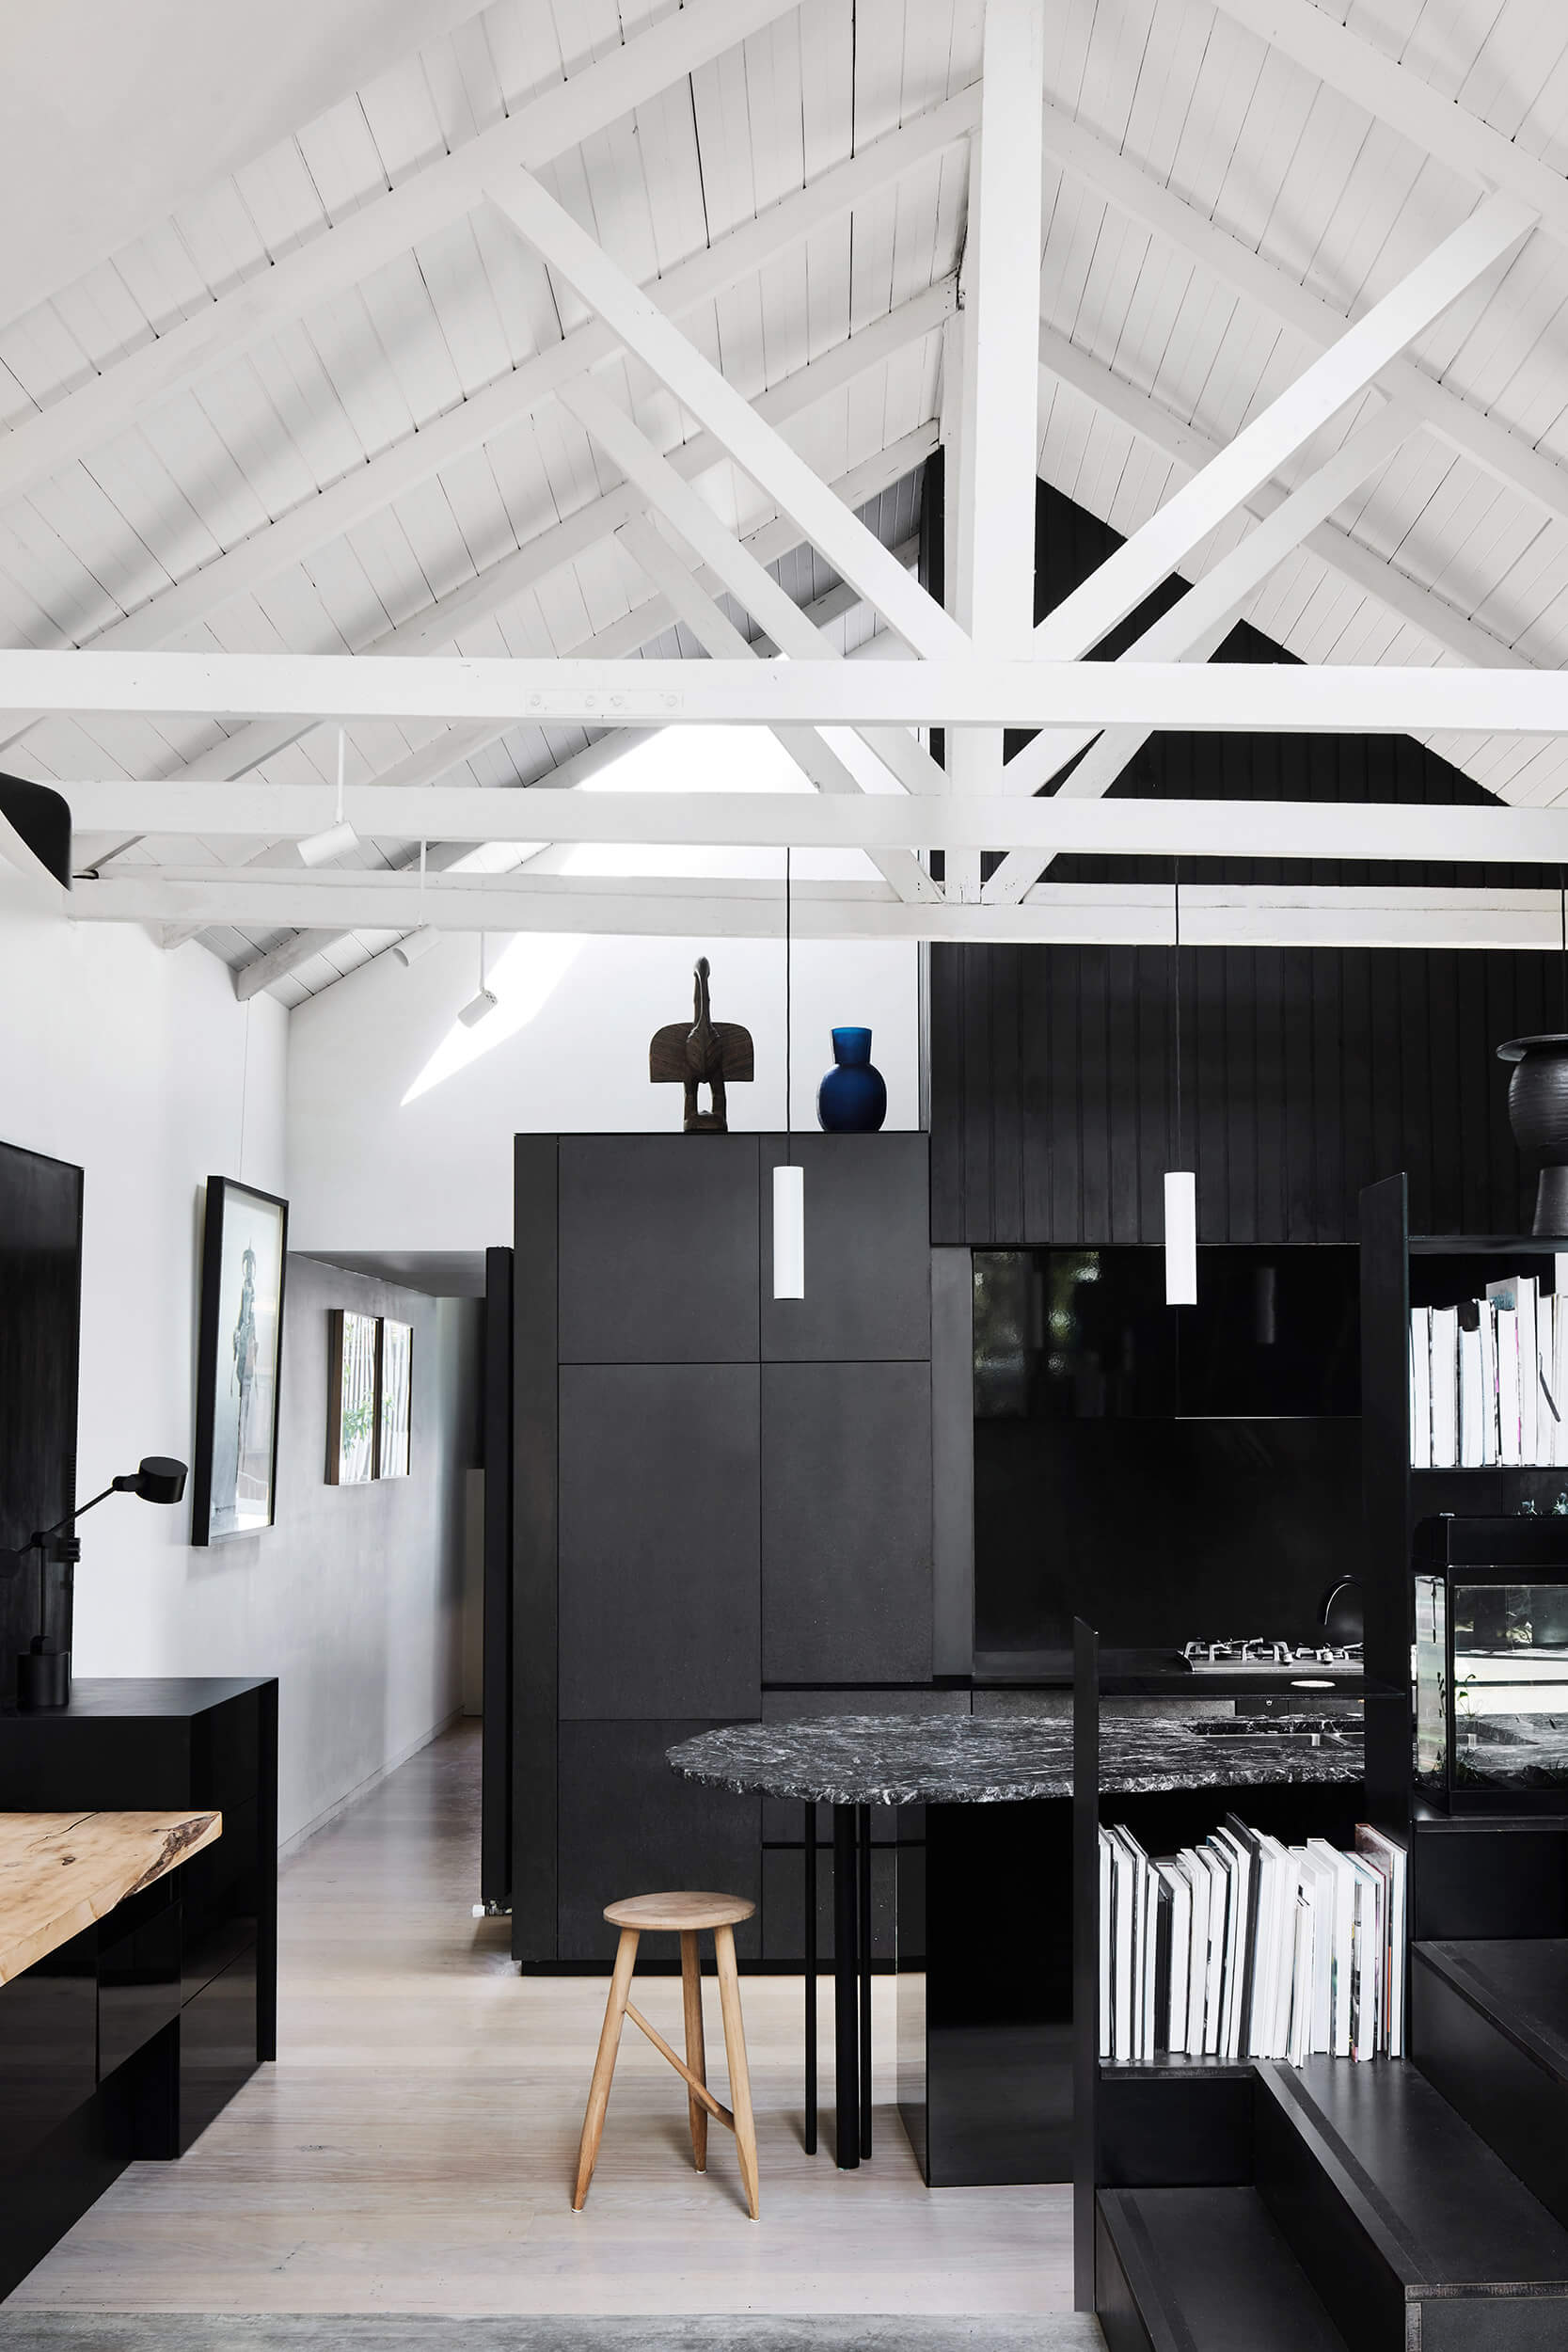 Host House's kitchen interior intersects the original white structure with additional elements in black. Photo by Sharyn Cairns